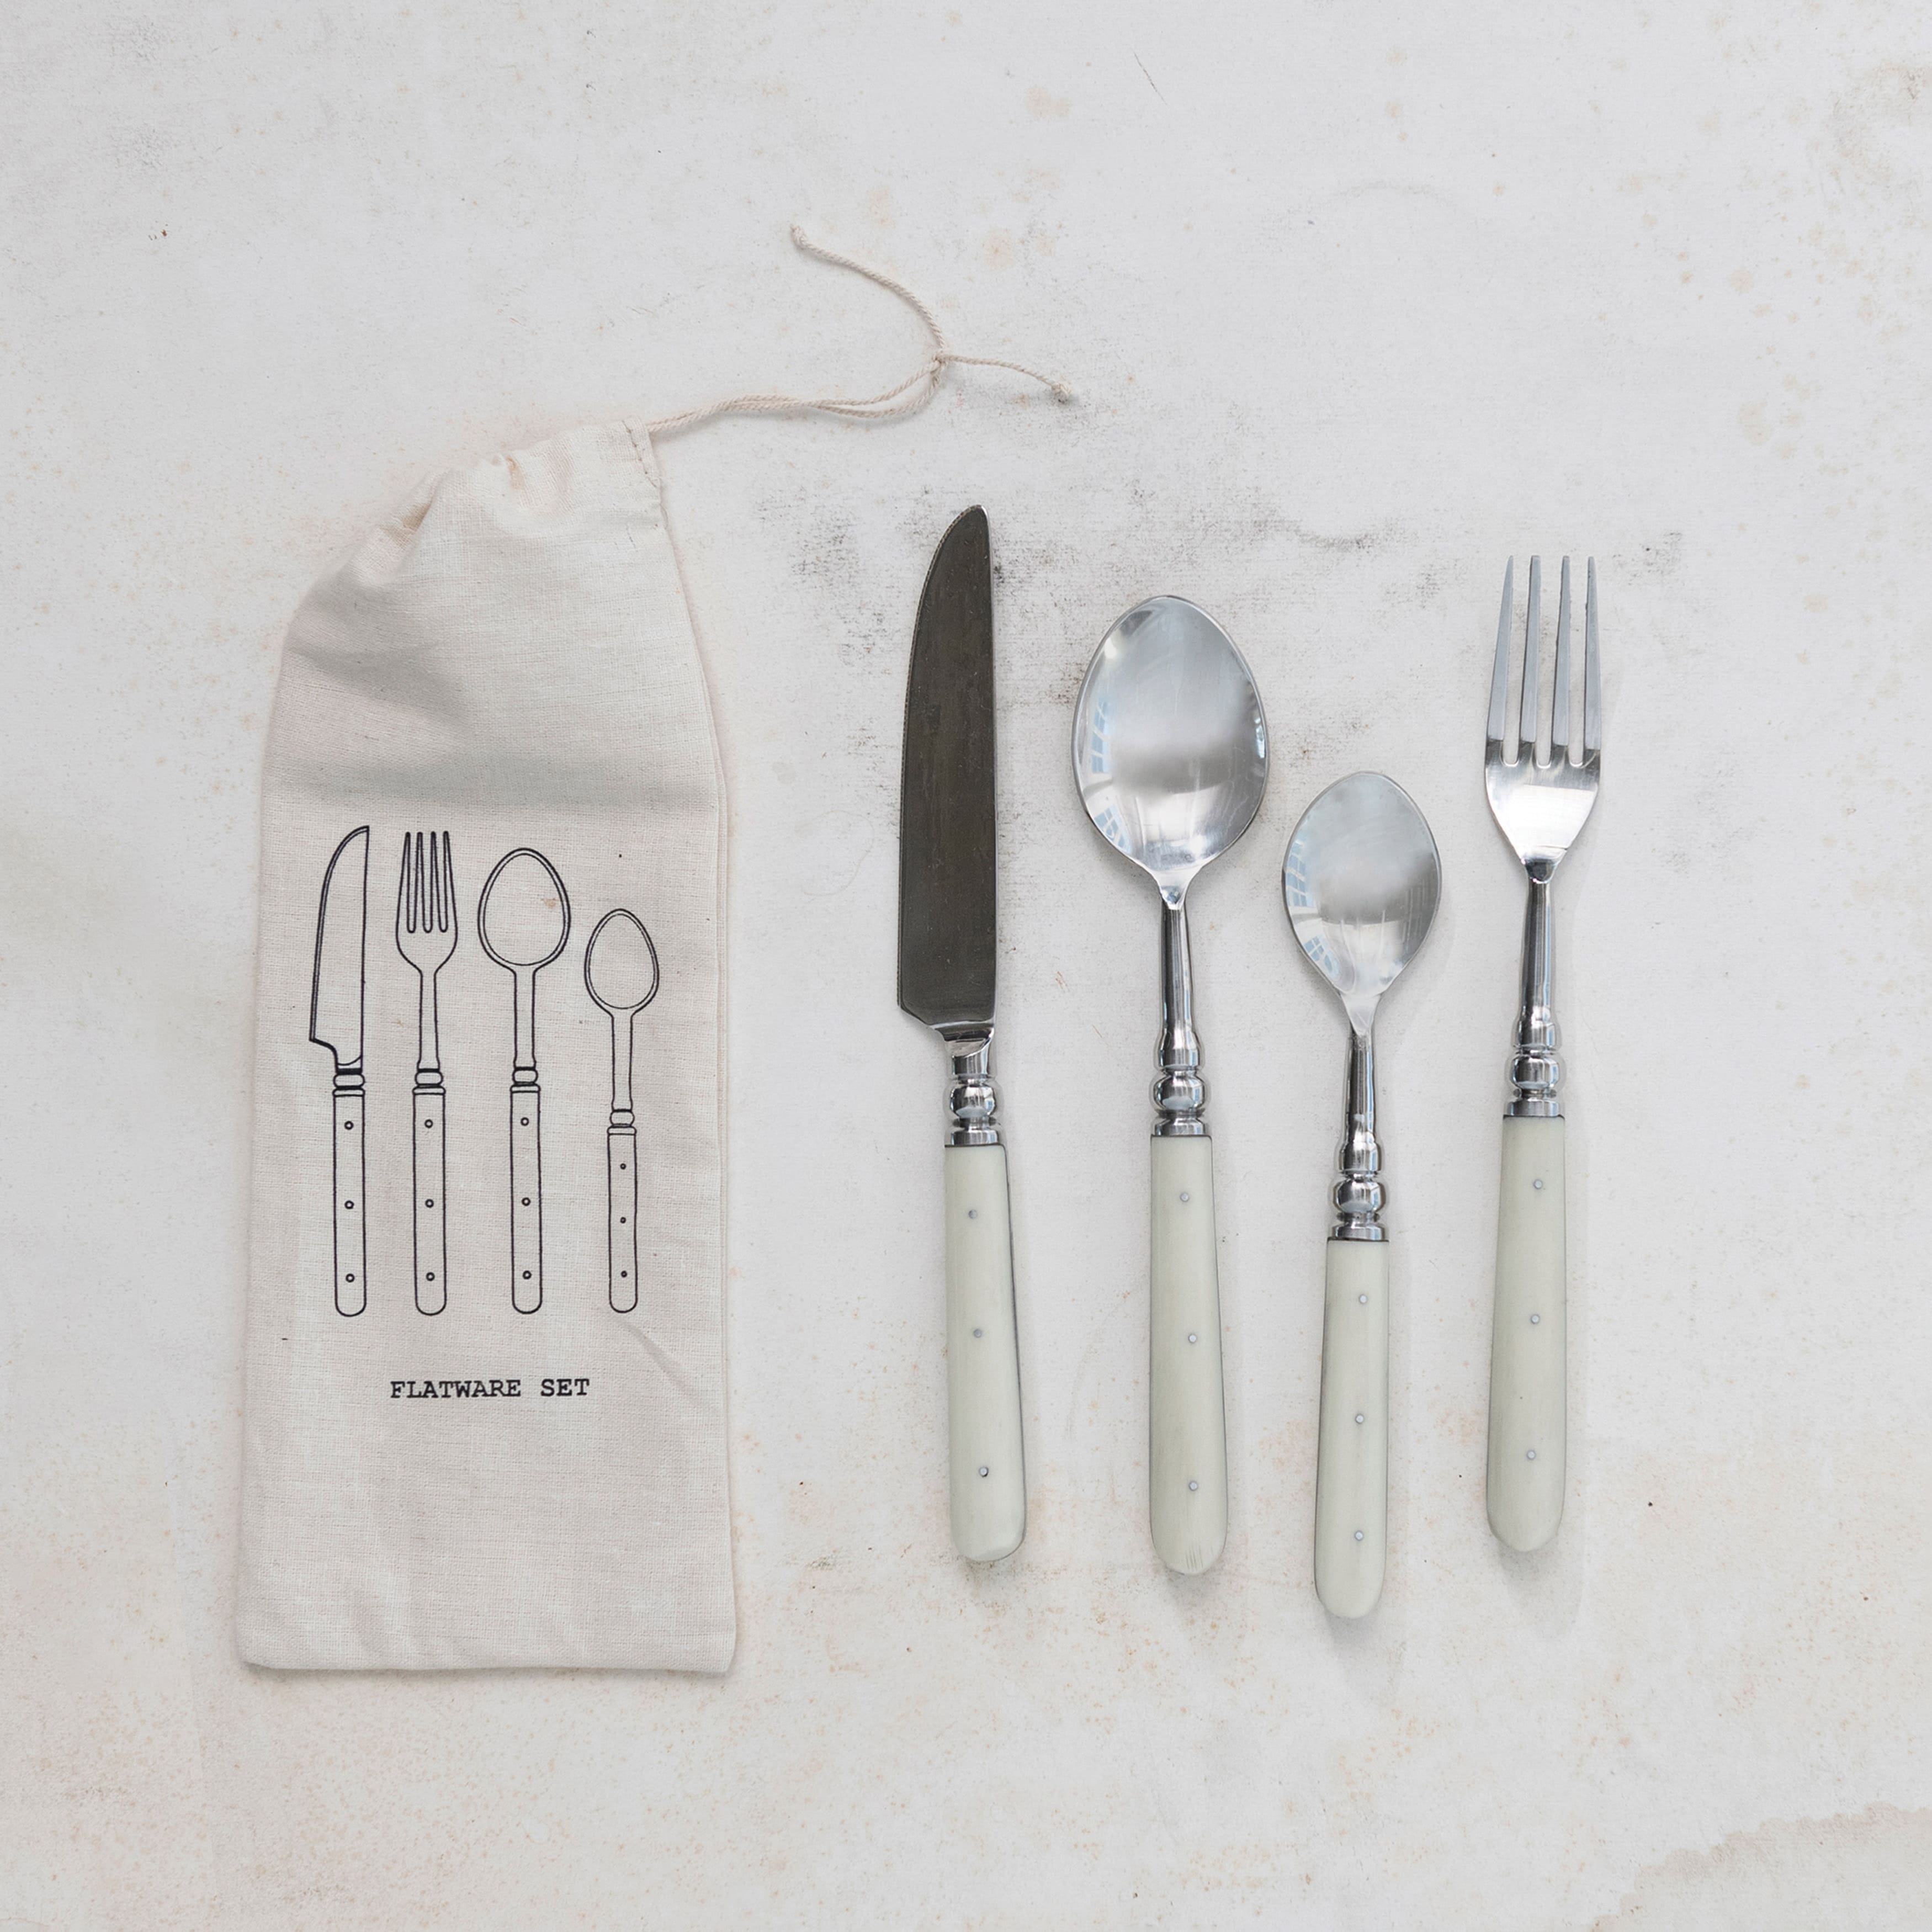 Cream Farmhouse Stainless Steel Cutlery Set in Drawstring Bag